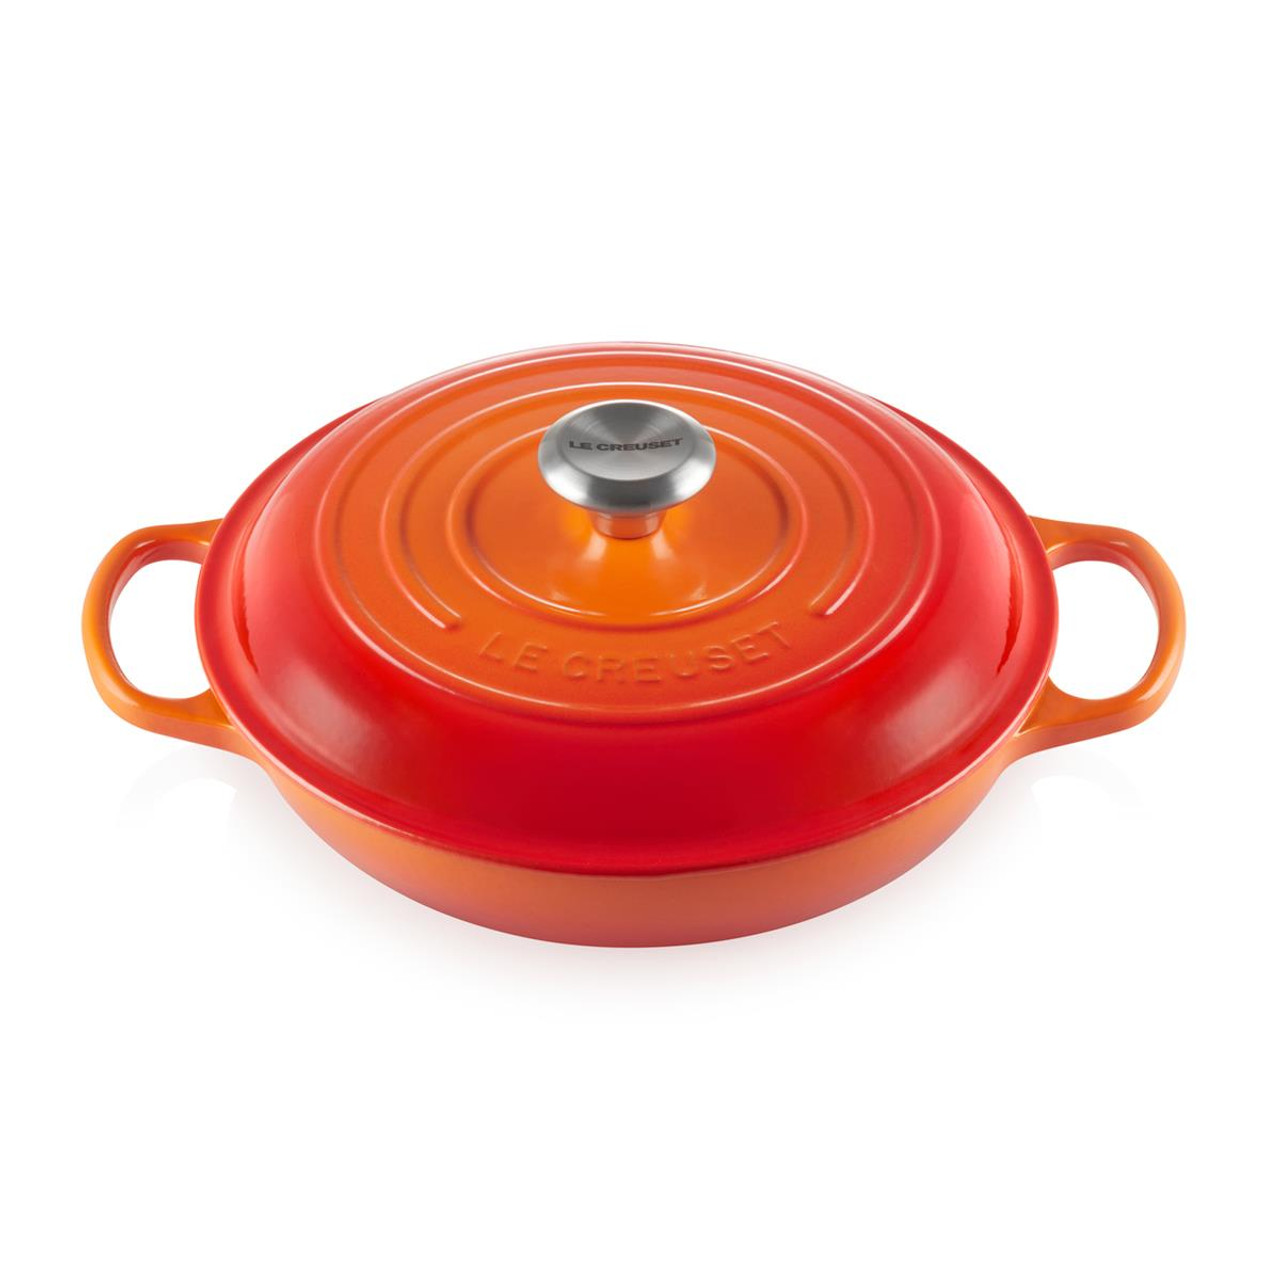 Which heat sources can the Le Creuset 26cm cast iron casserole dish be used on?